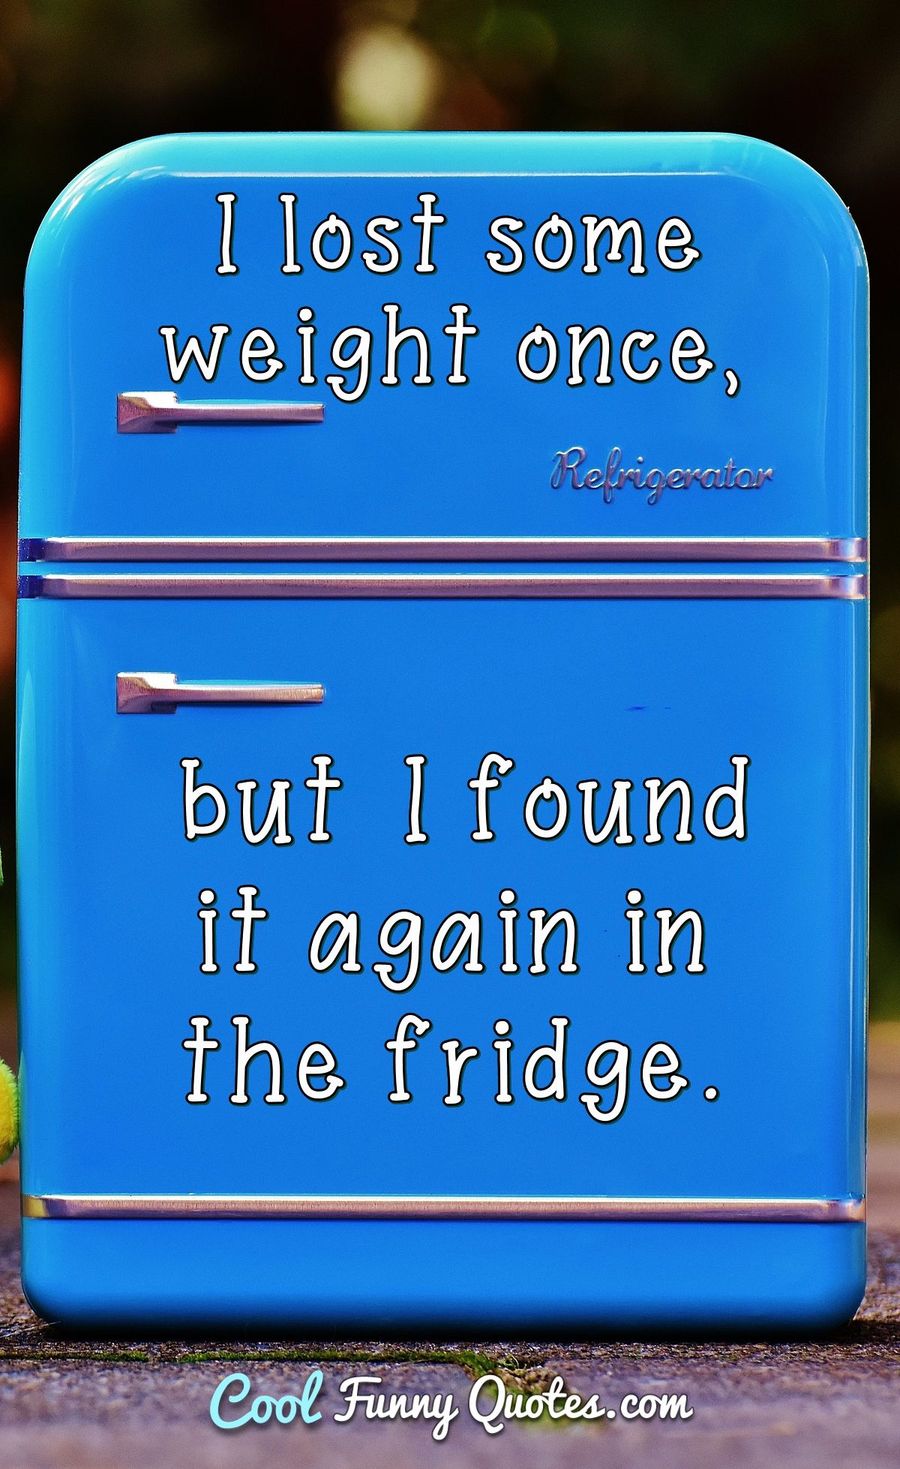 I lost some weight once, but I found it again in the fridge.